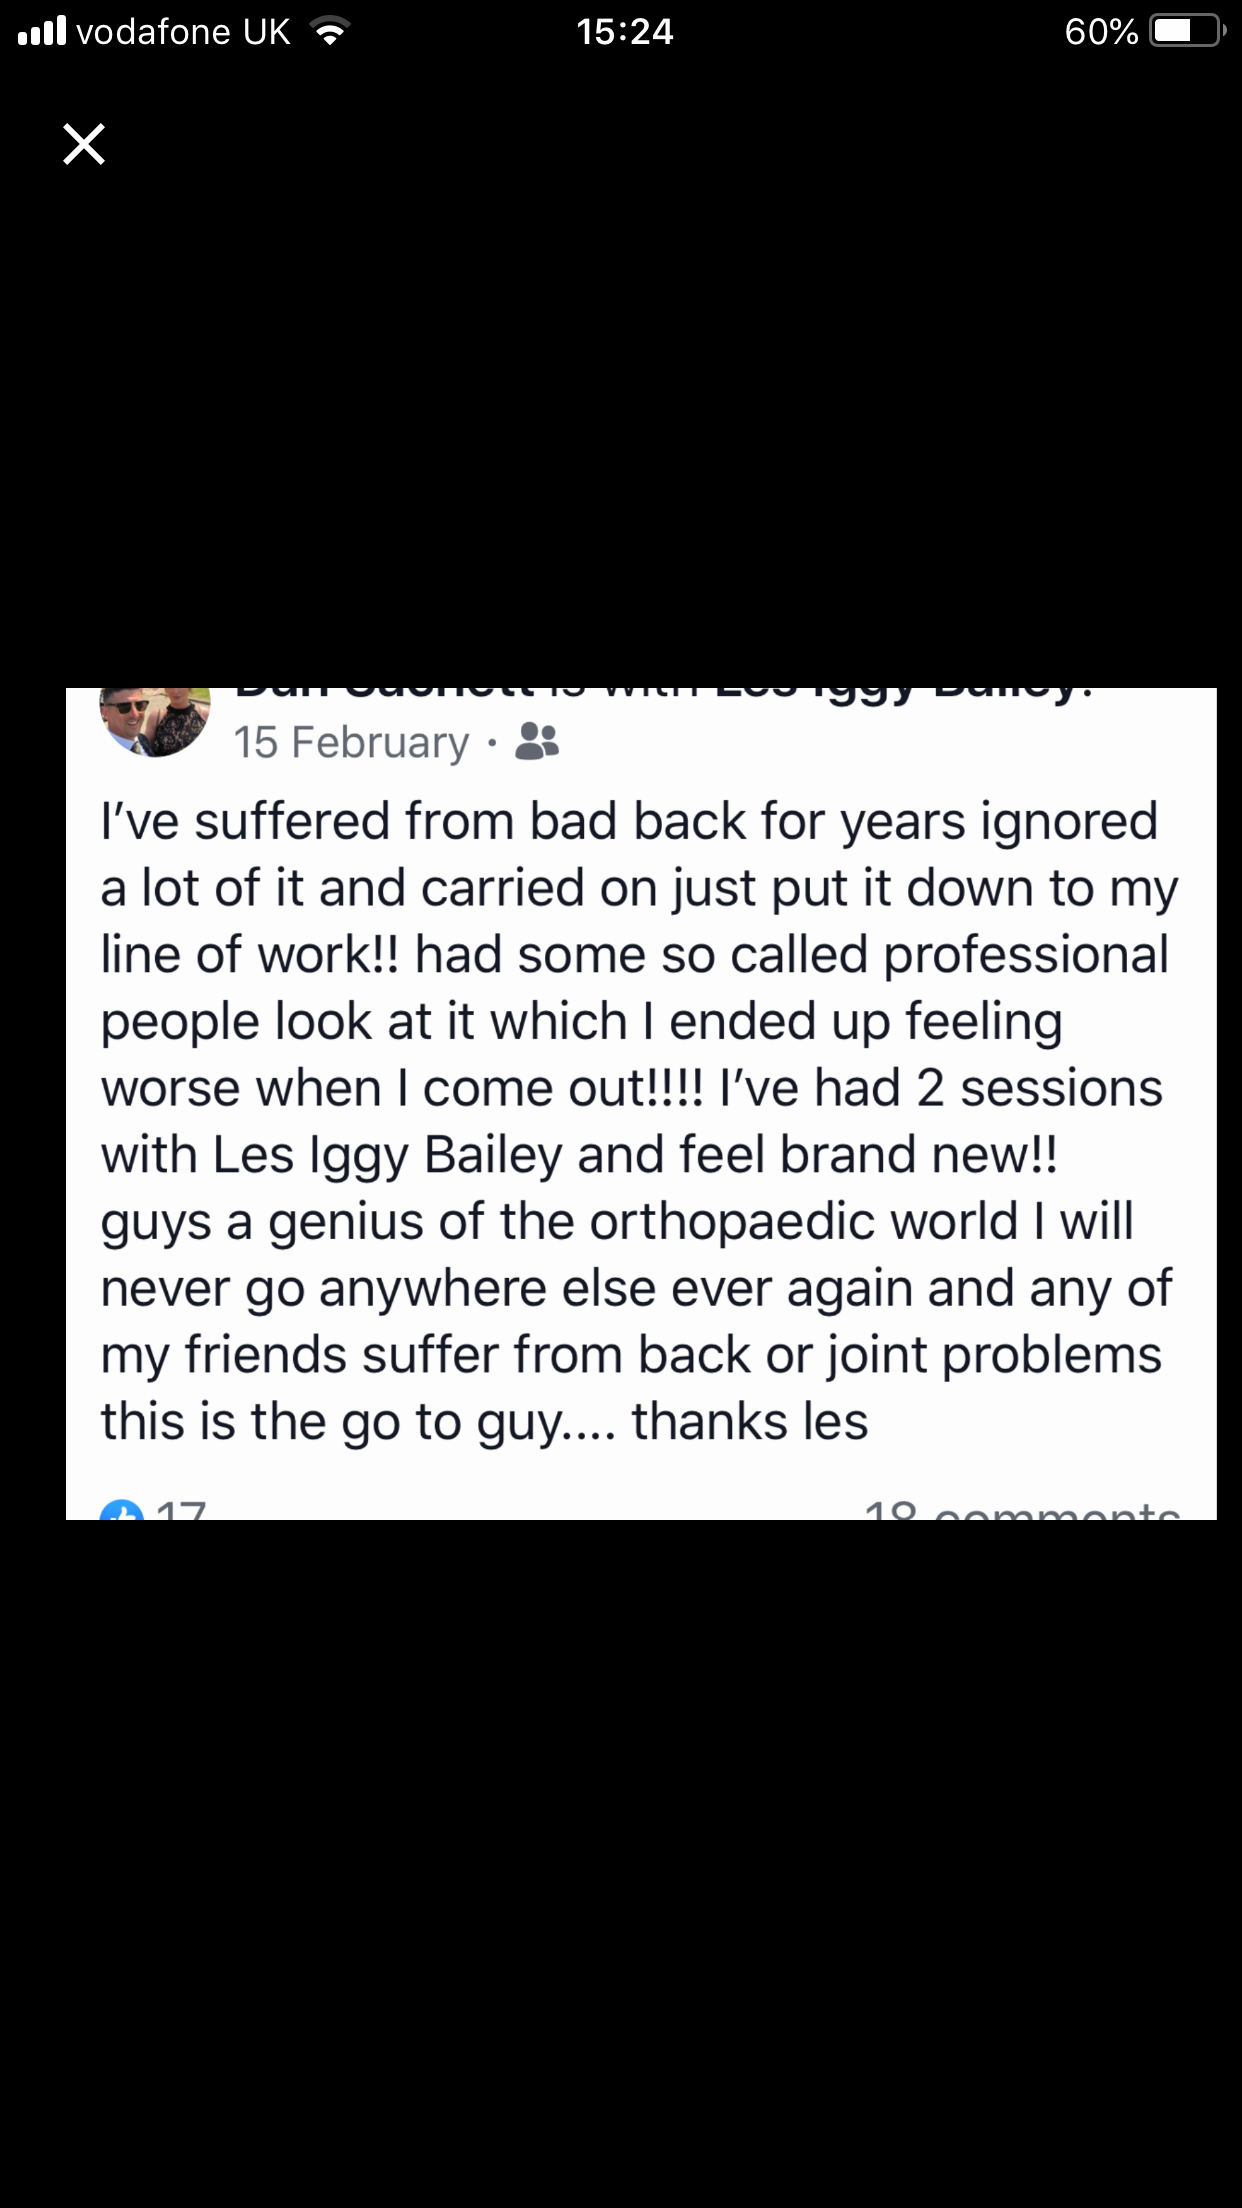 Philosophy for new osteopaths and chiropractors based on 41 years successful practice. by Dr Les Bailey , back and joint pain centre, caterham